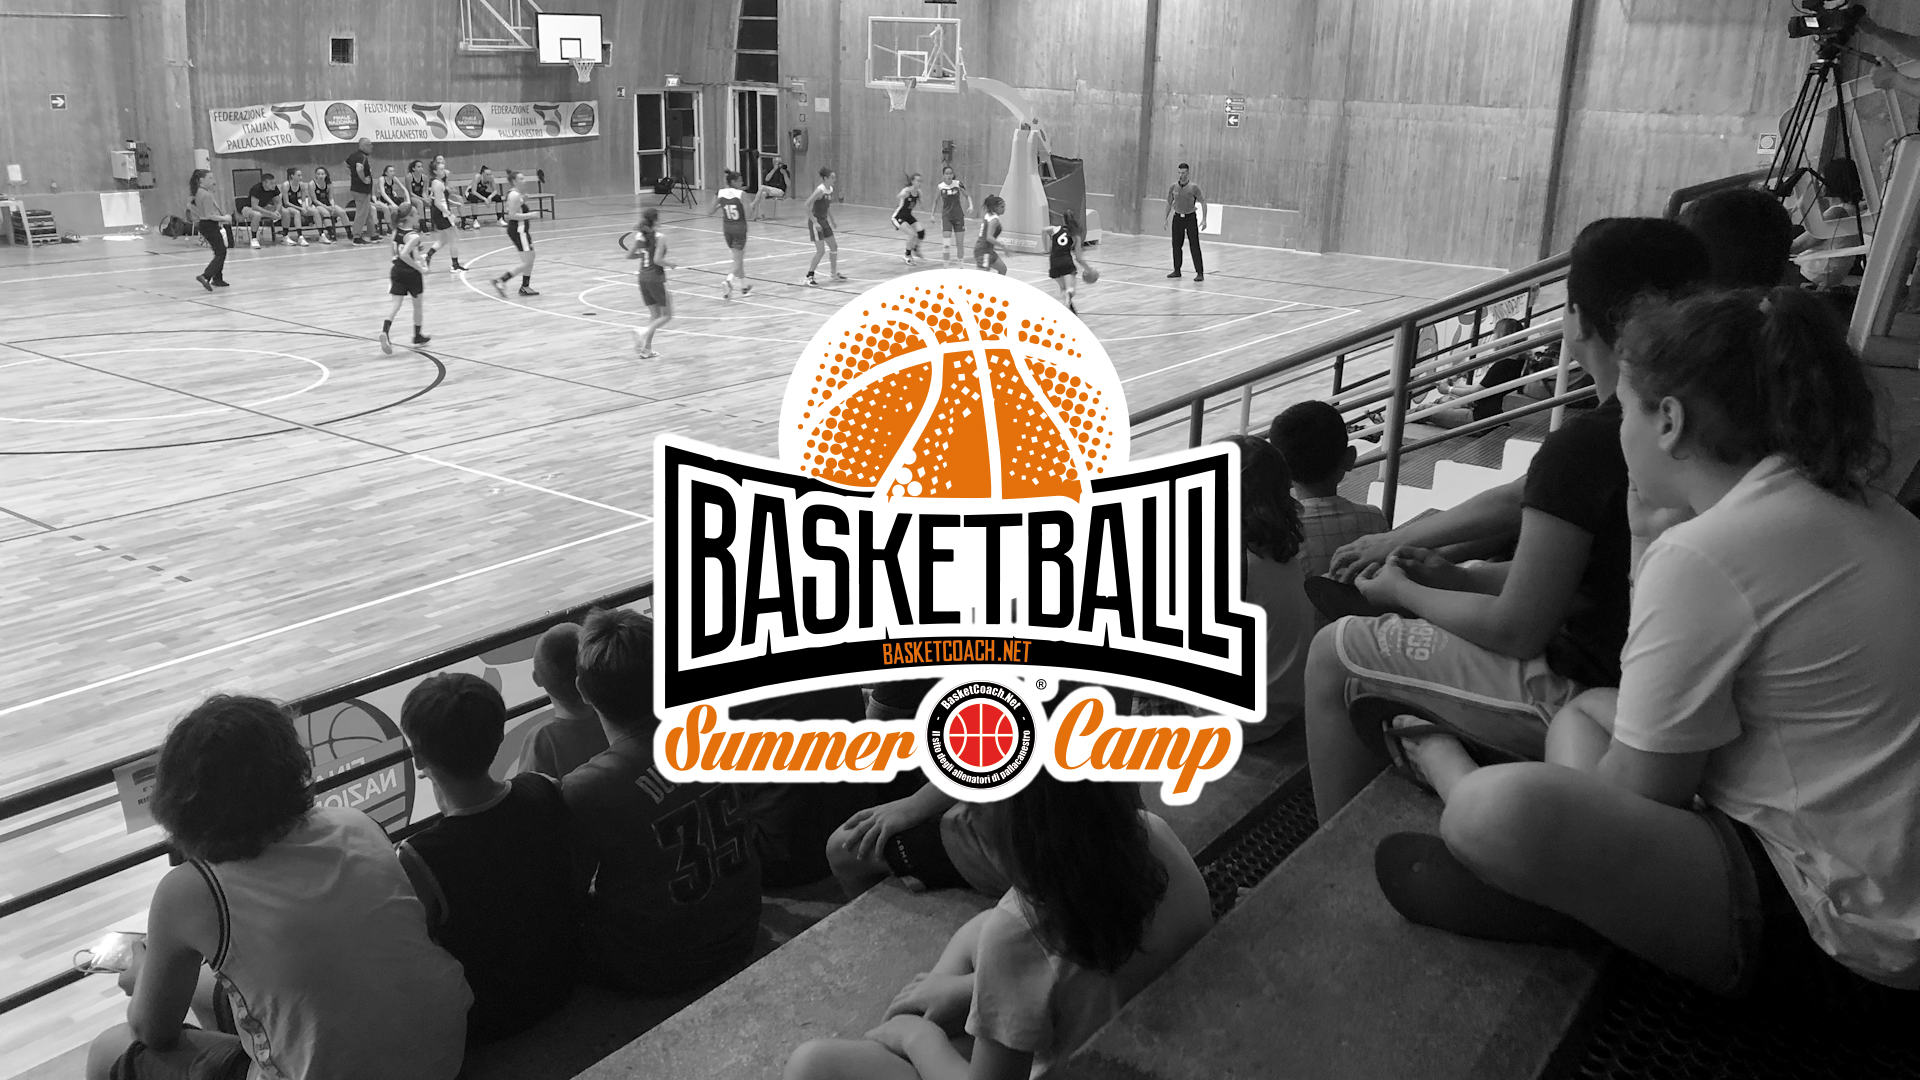 <p>BSC Basket Summer Camp - Improve Yourself!</p>
